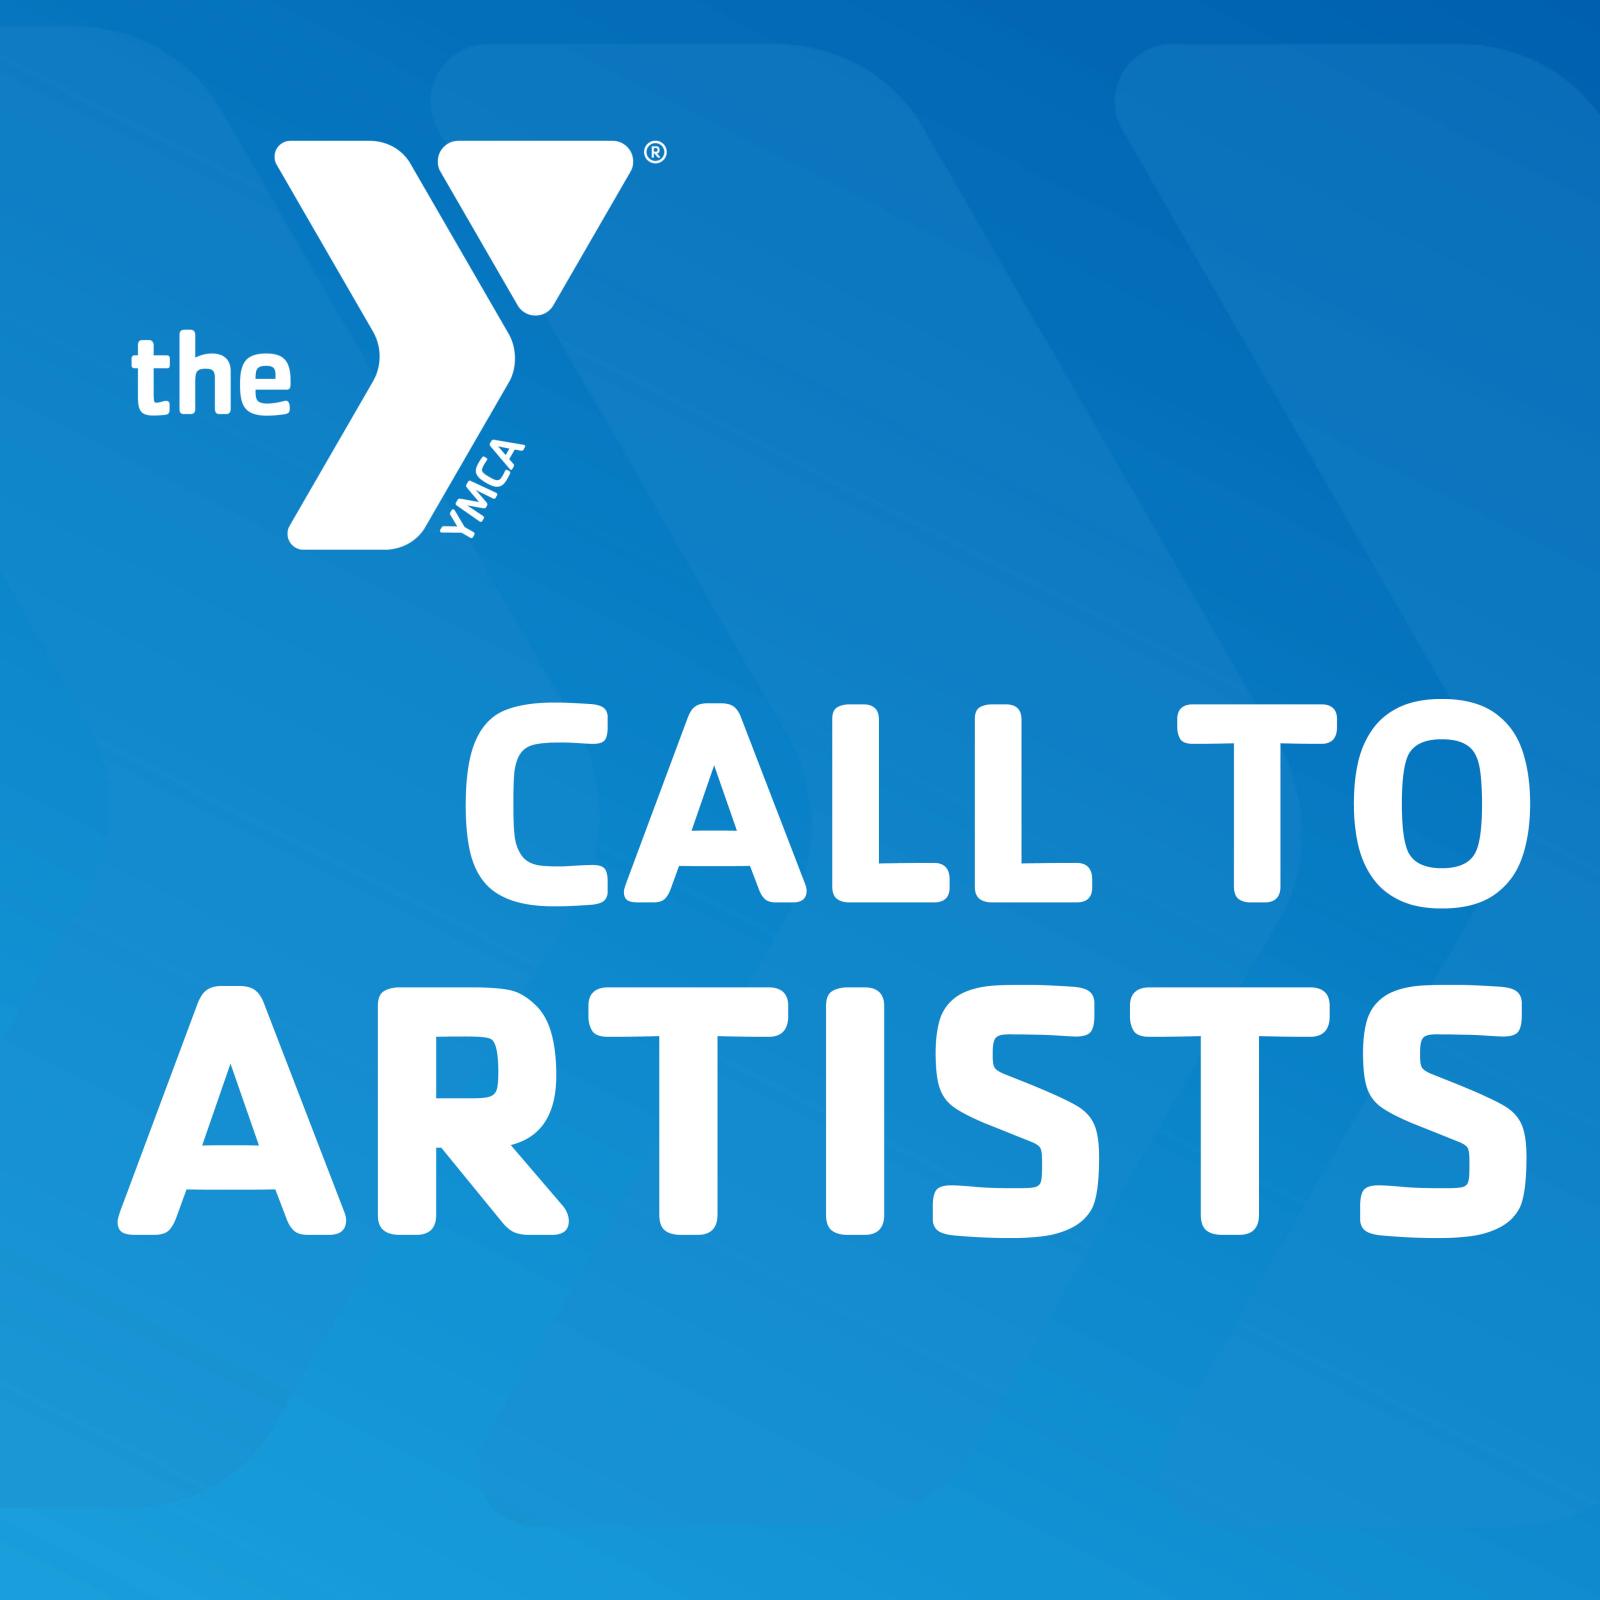 ymca call to artists